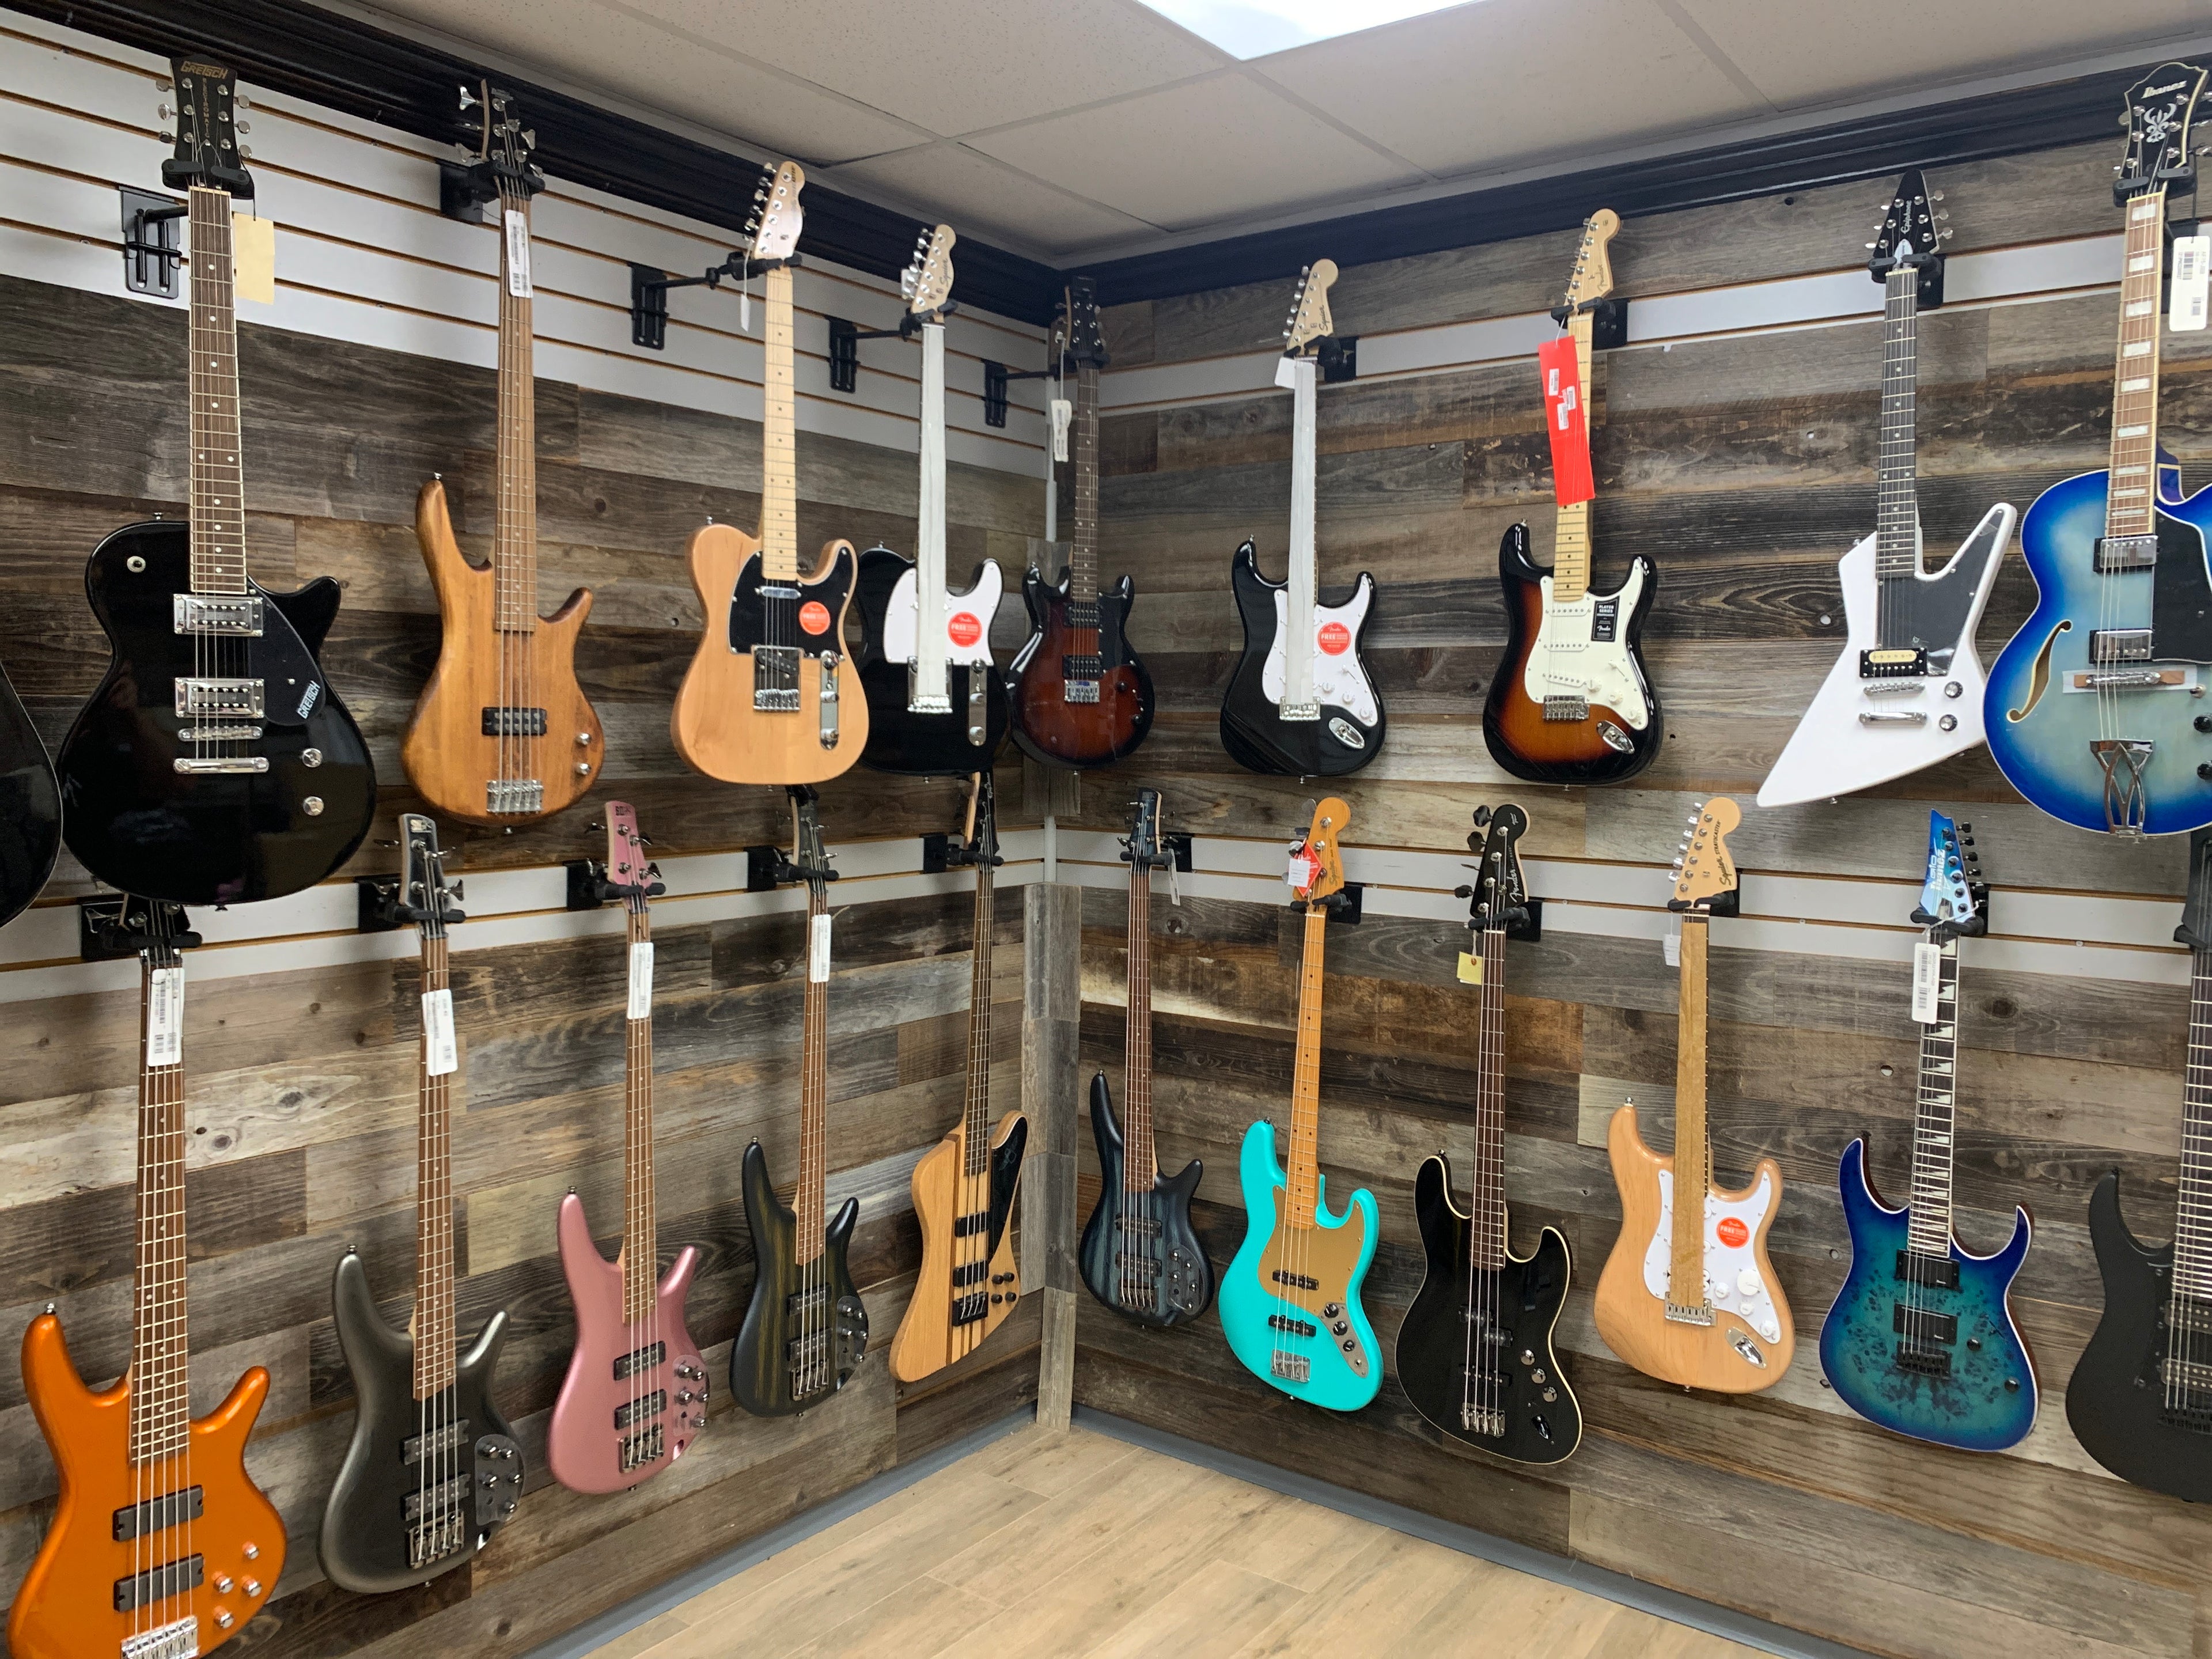 Showroom Wall with wooden background with a mix of 20 electric guitars and basses